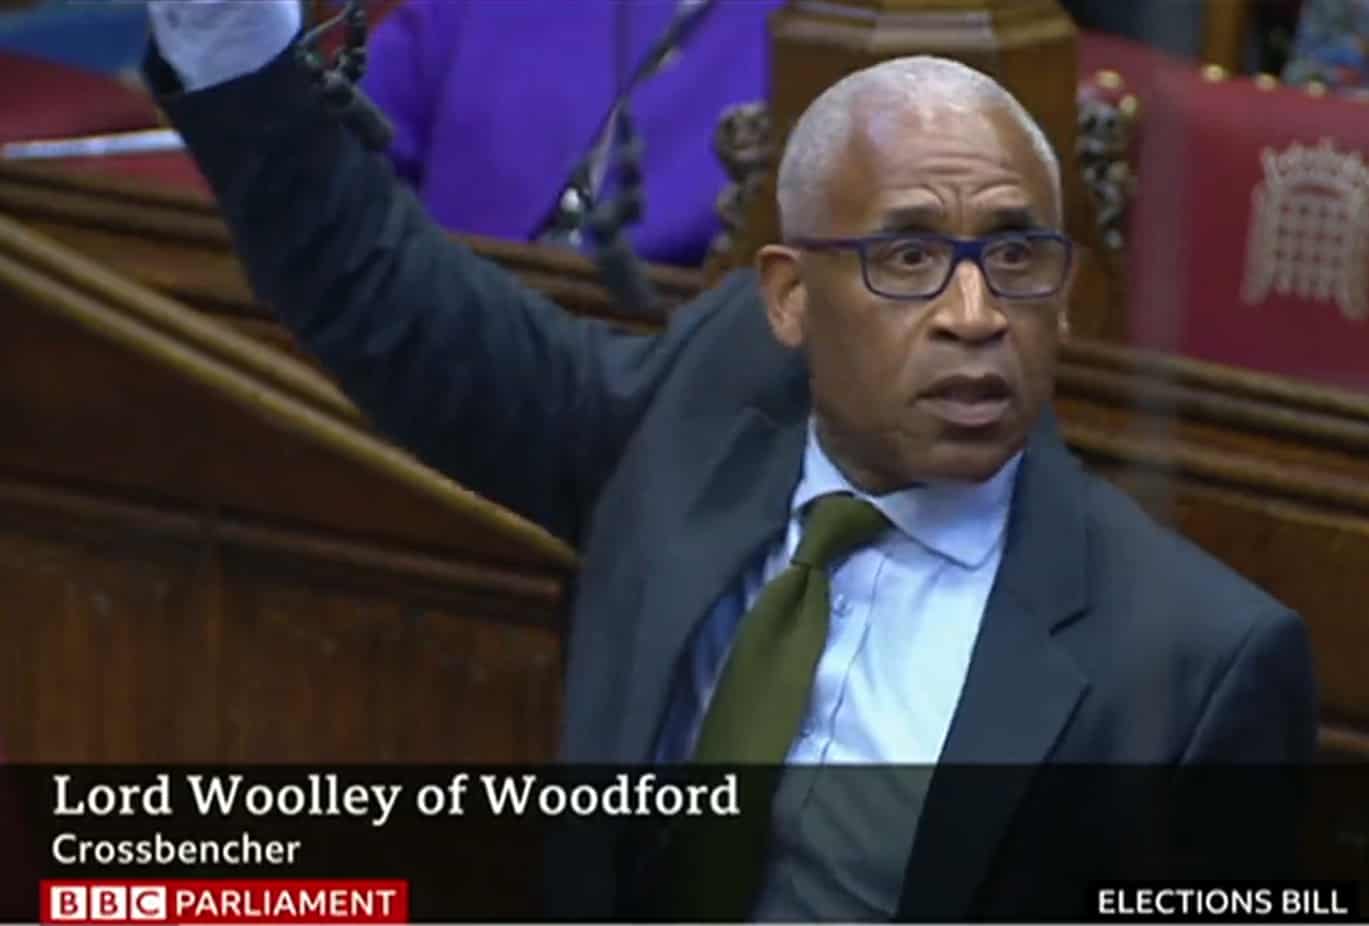 Peers asked to raise their hands if they have faced police stop and search